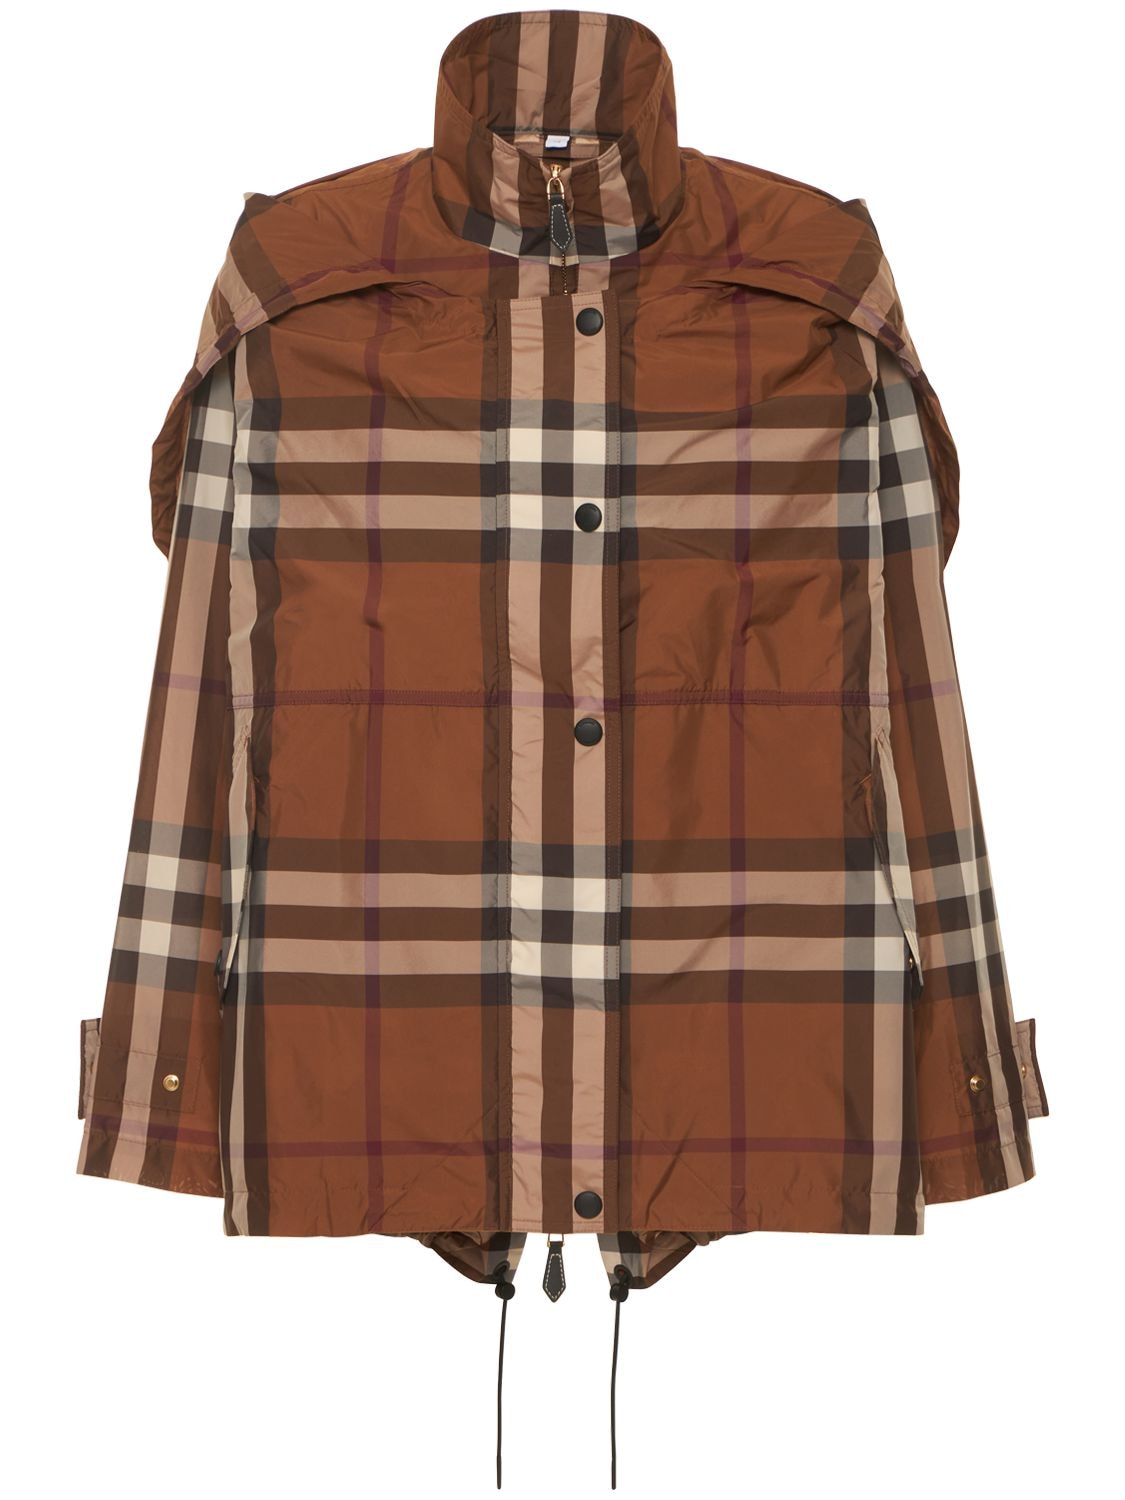 BURBERRY Notter Check Deconstructed Nylon Jacket